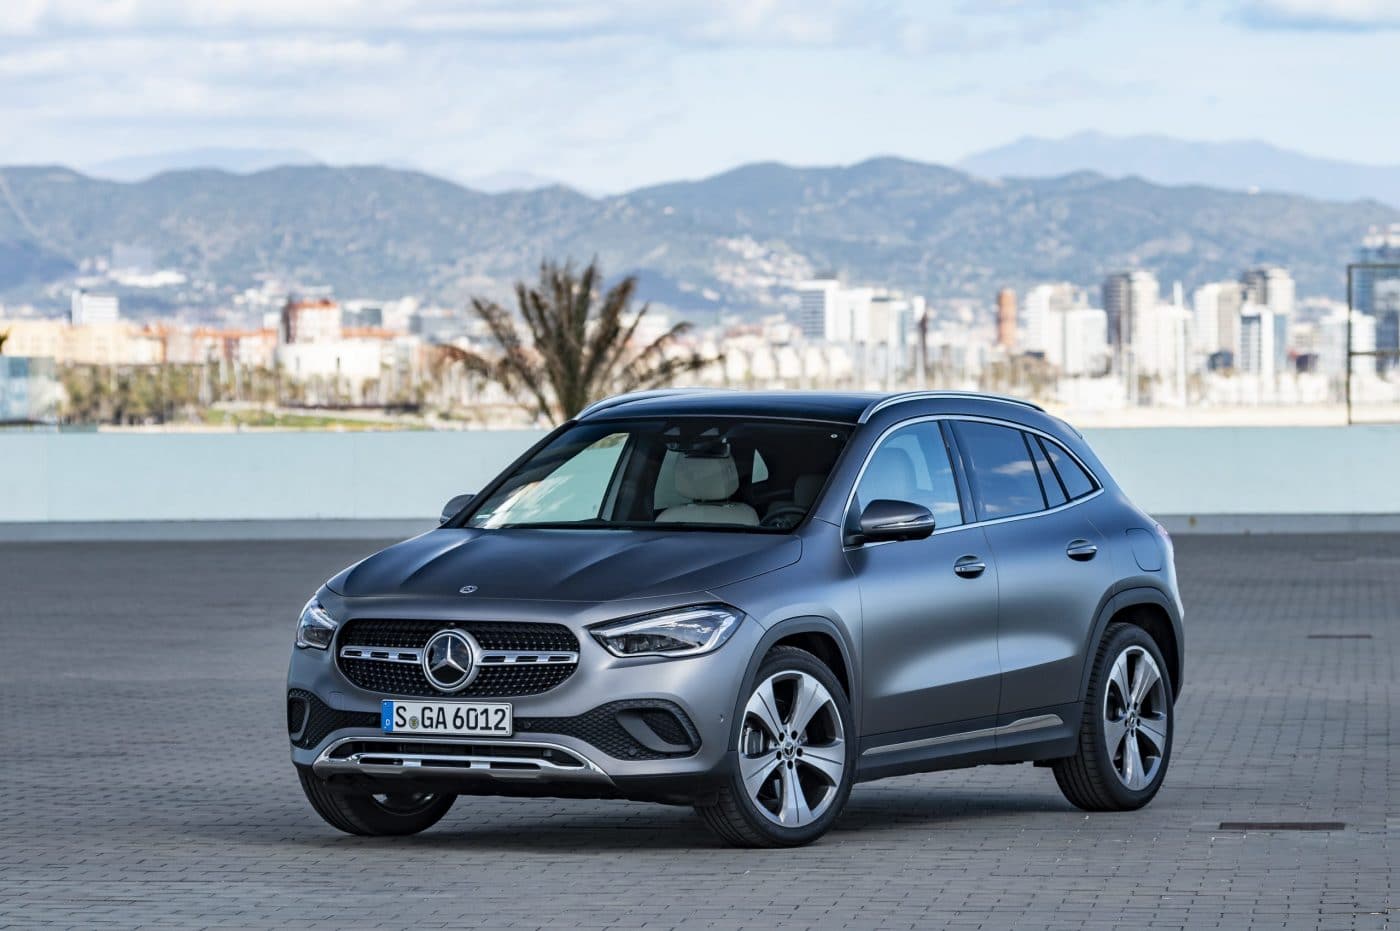 Mercedes-Benz Launches Safer, Roomier GLA SUV